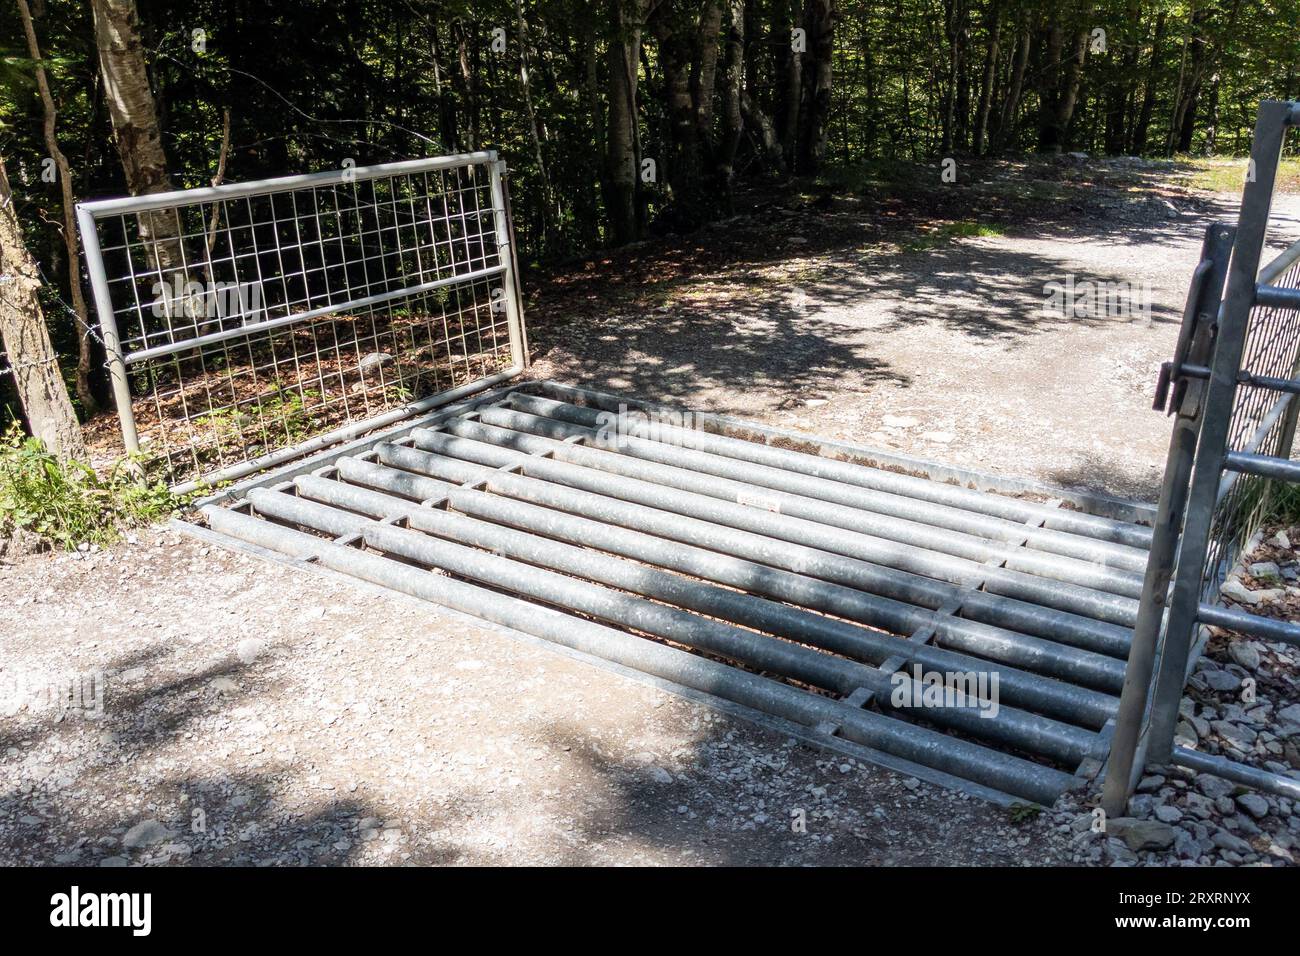 Iron bar cattle grid in forest way for car and cattle grate to protect exit animal cattle guard Stock Photo